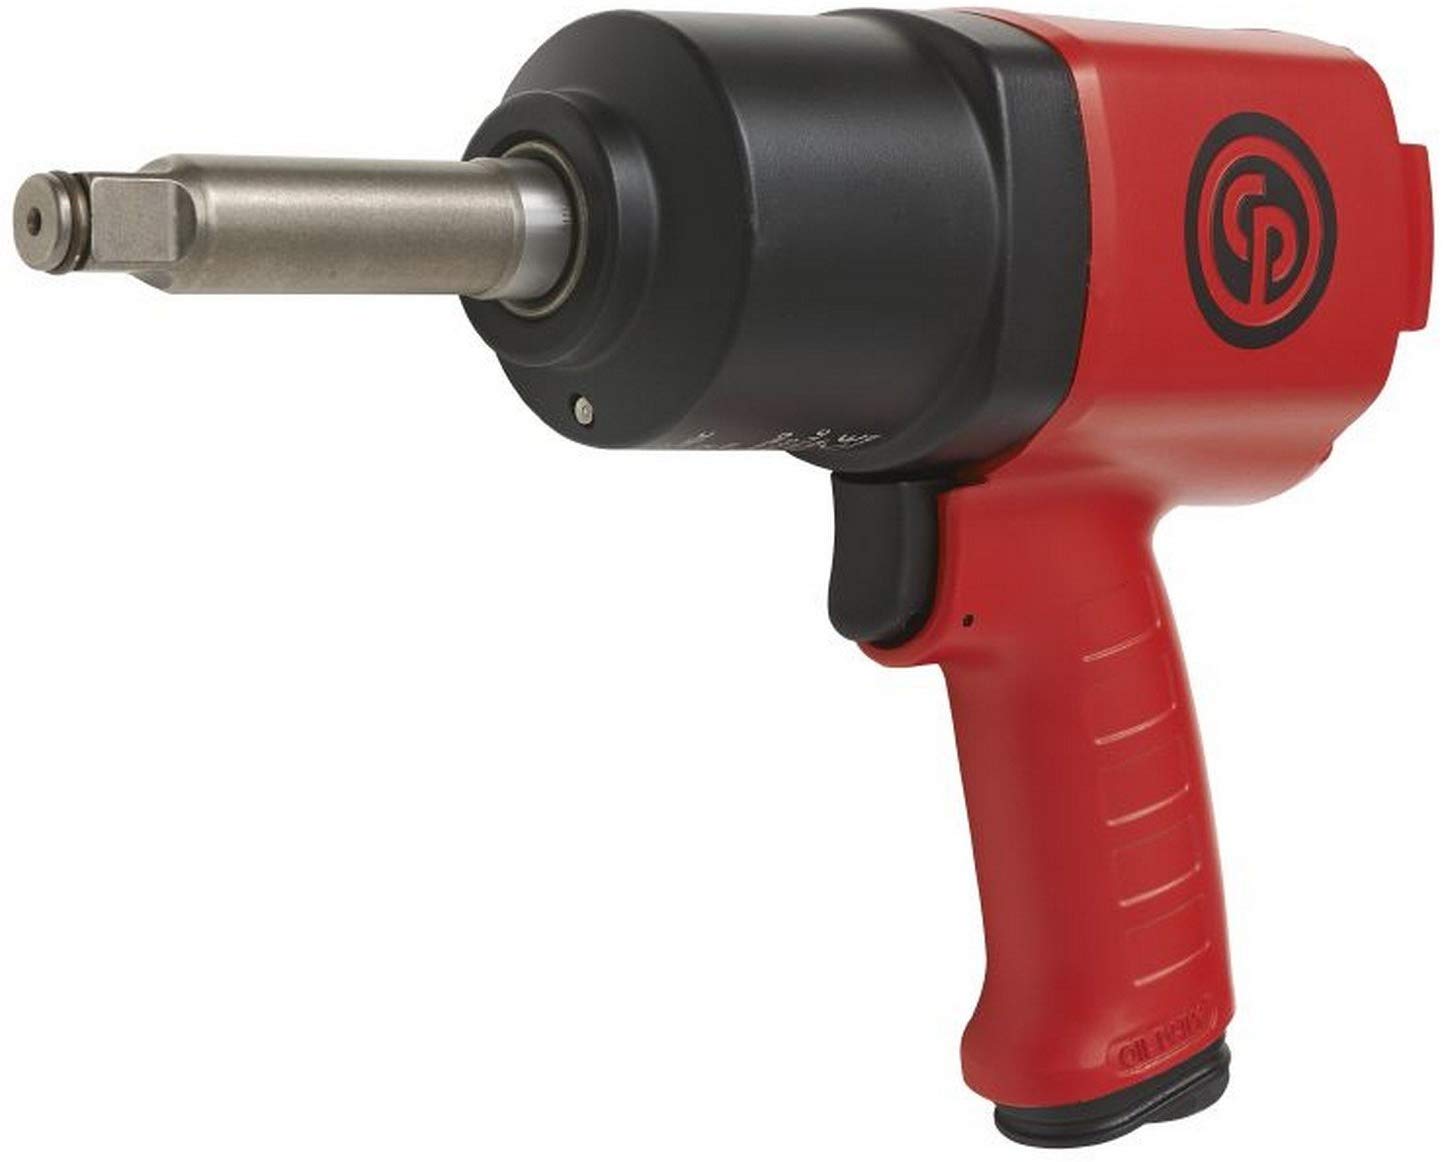 Chicago Pneumatic 1/2" Impact Wrench with Long Anvil - 670 ft.lbs Torque